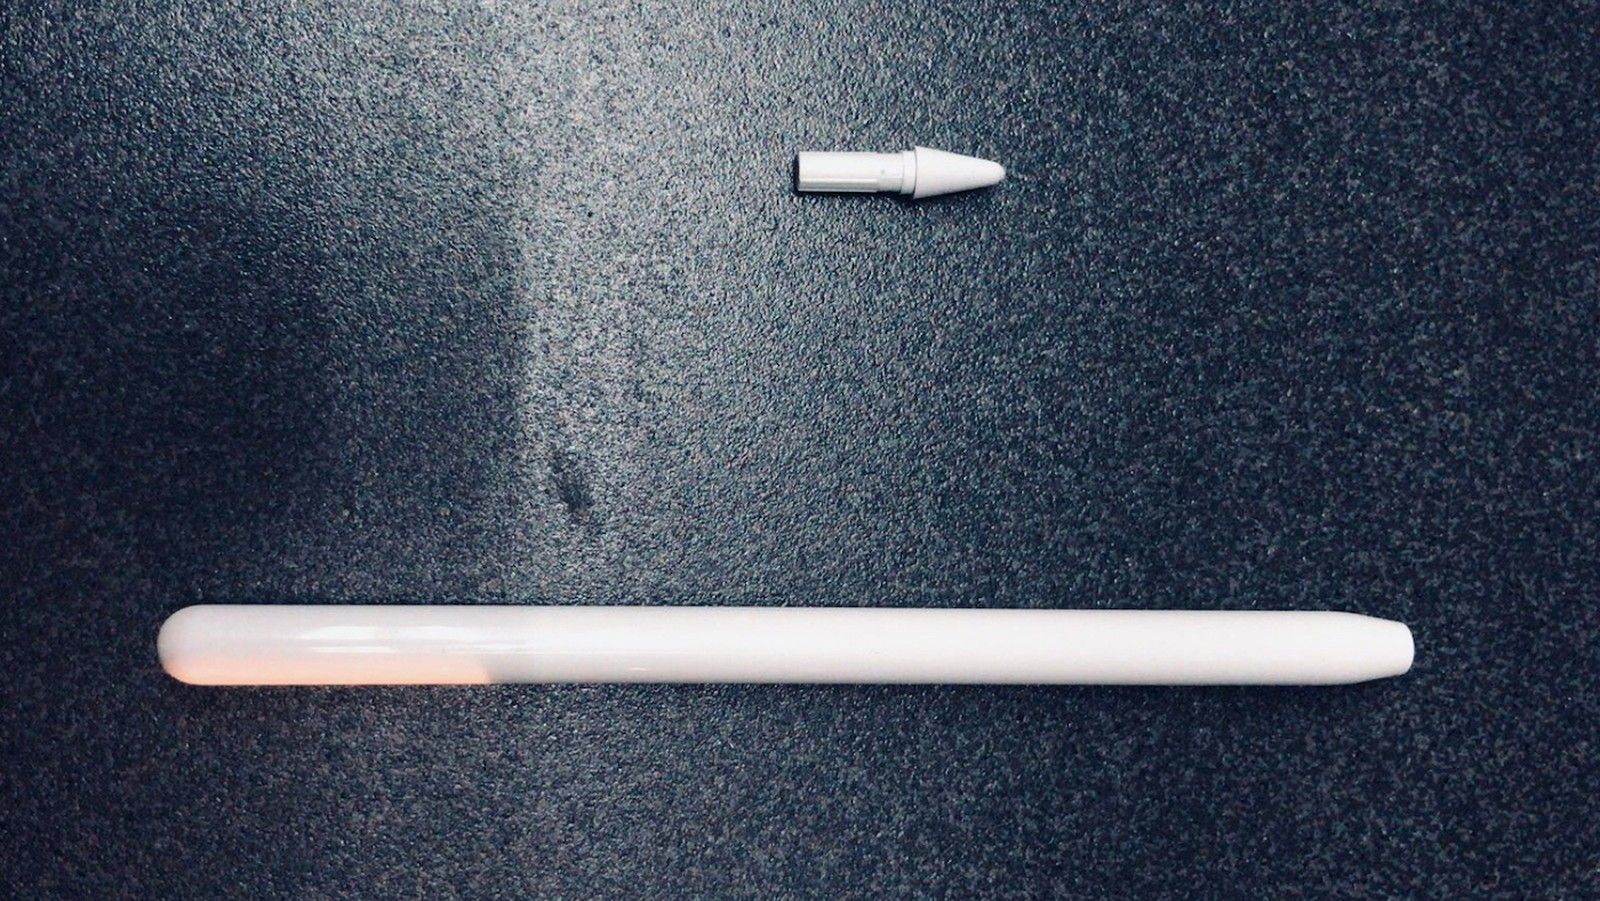 Revealed image of the next generation Apple Pencil